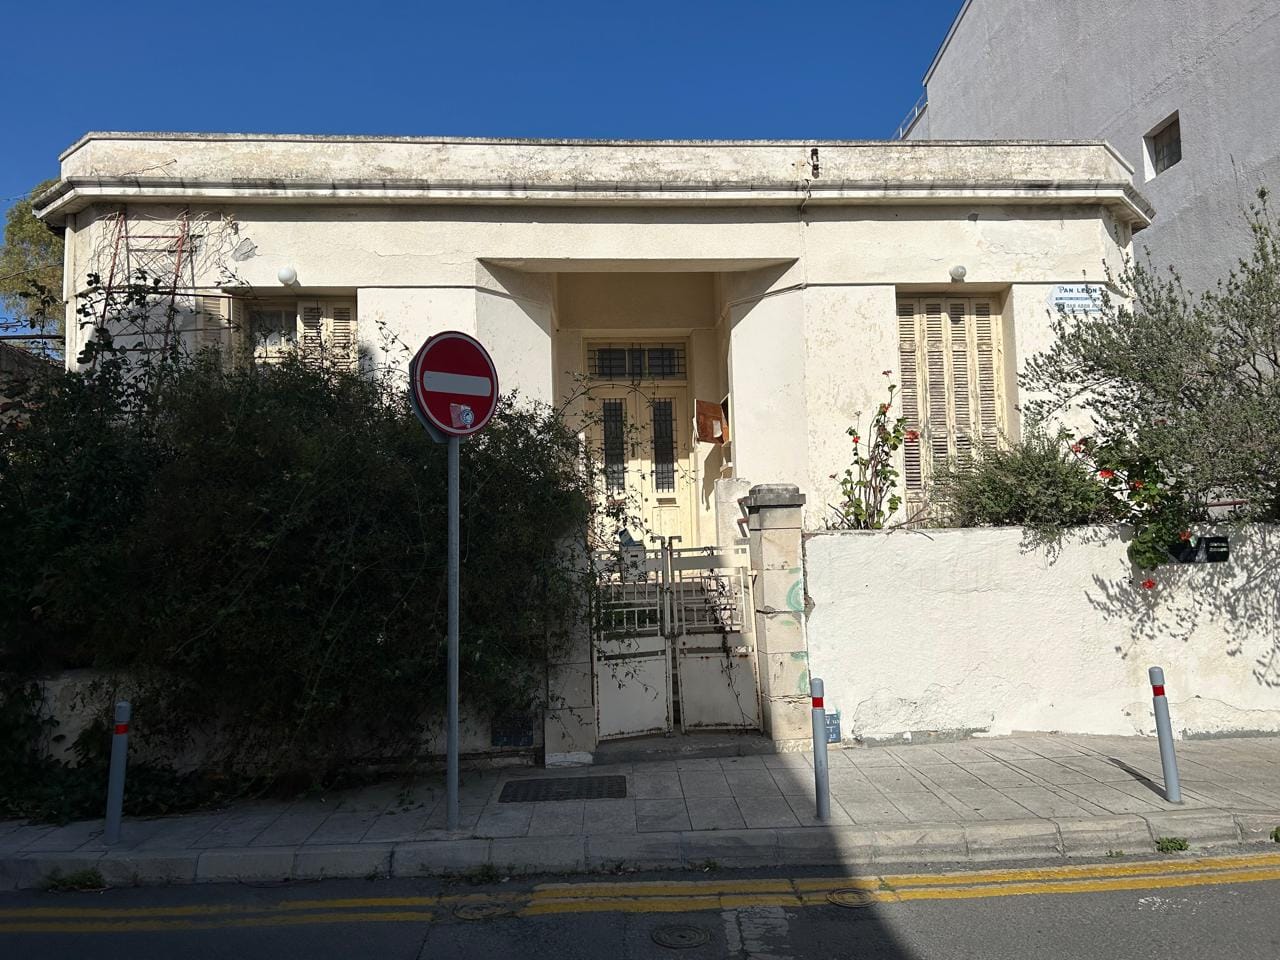 The Municipality of Lemesos will declare the conservatory of Solon Michaelides as a listed building of historical interest